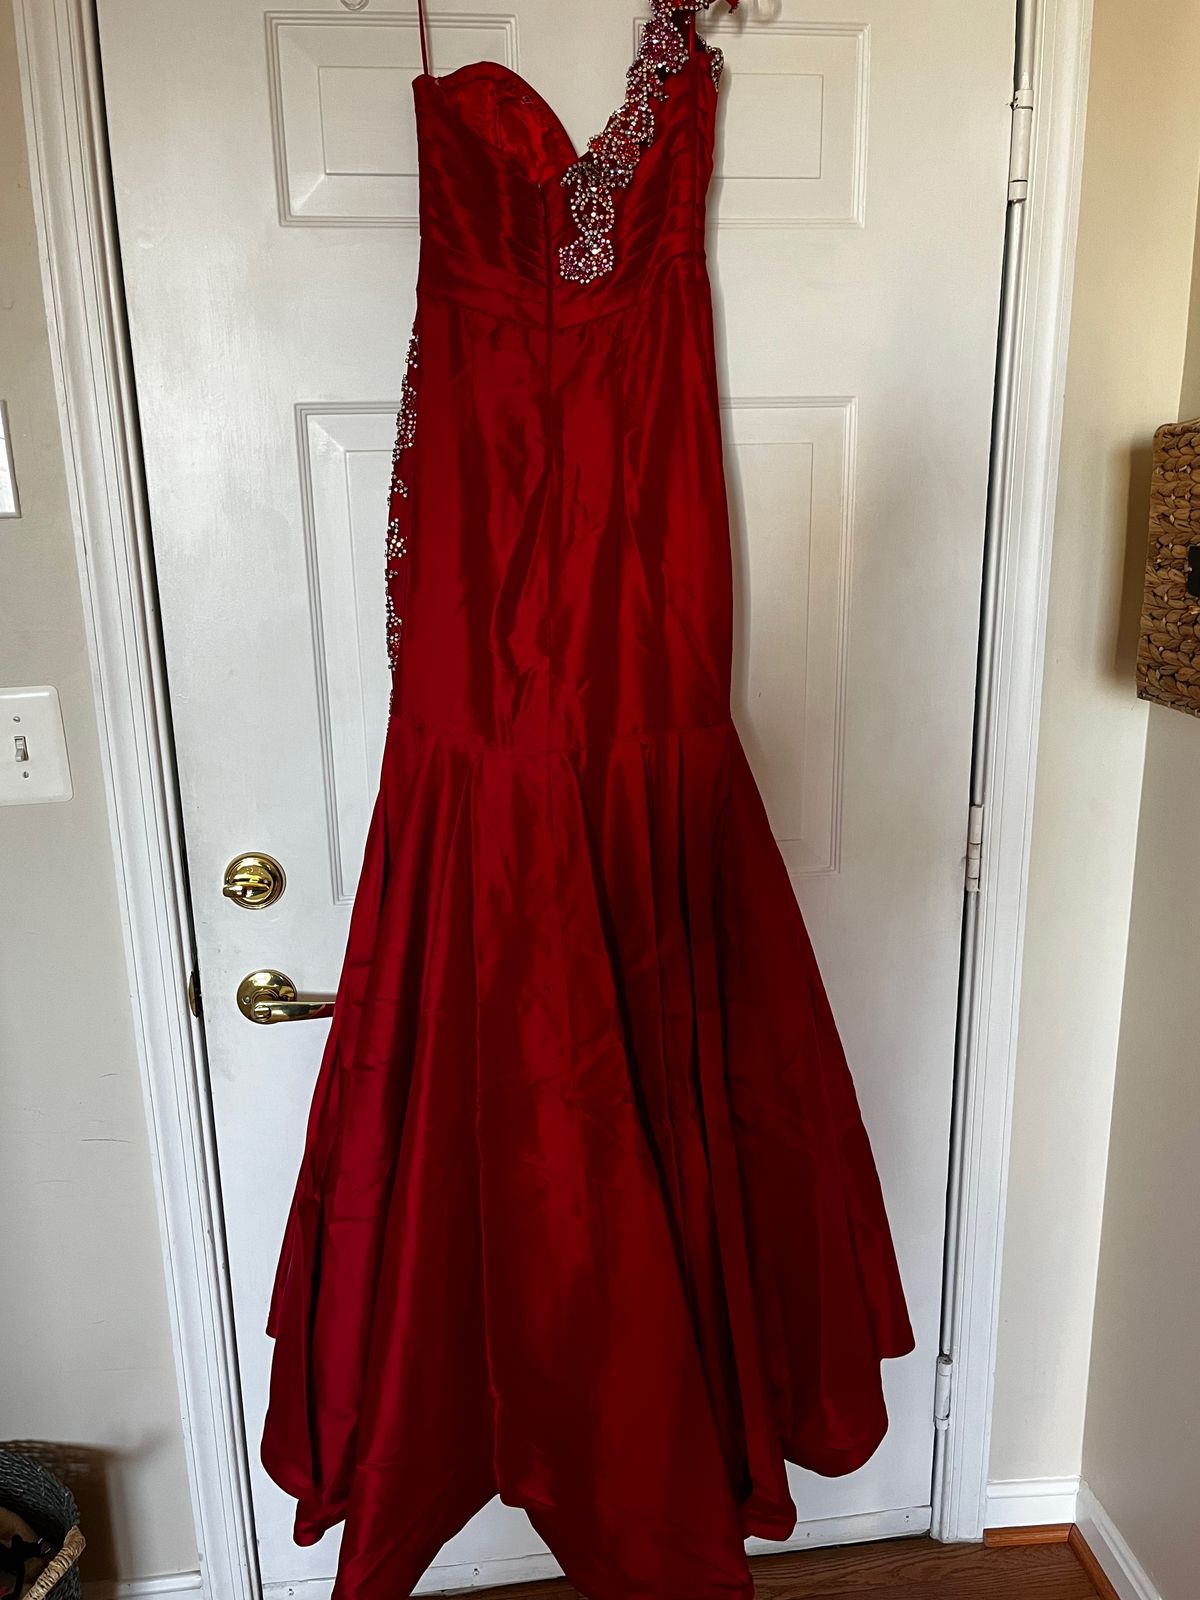 Sherri Hill Size 0 Prom One Shoulder Sequined Red Mermaid Dress on Queenly